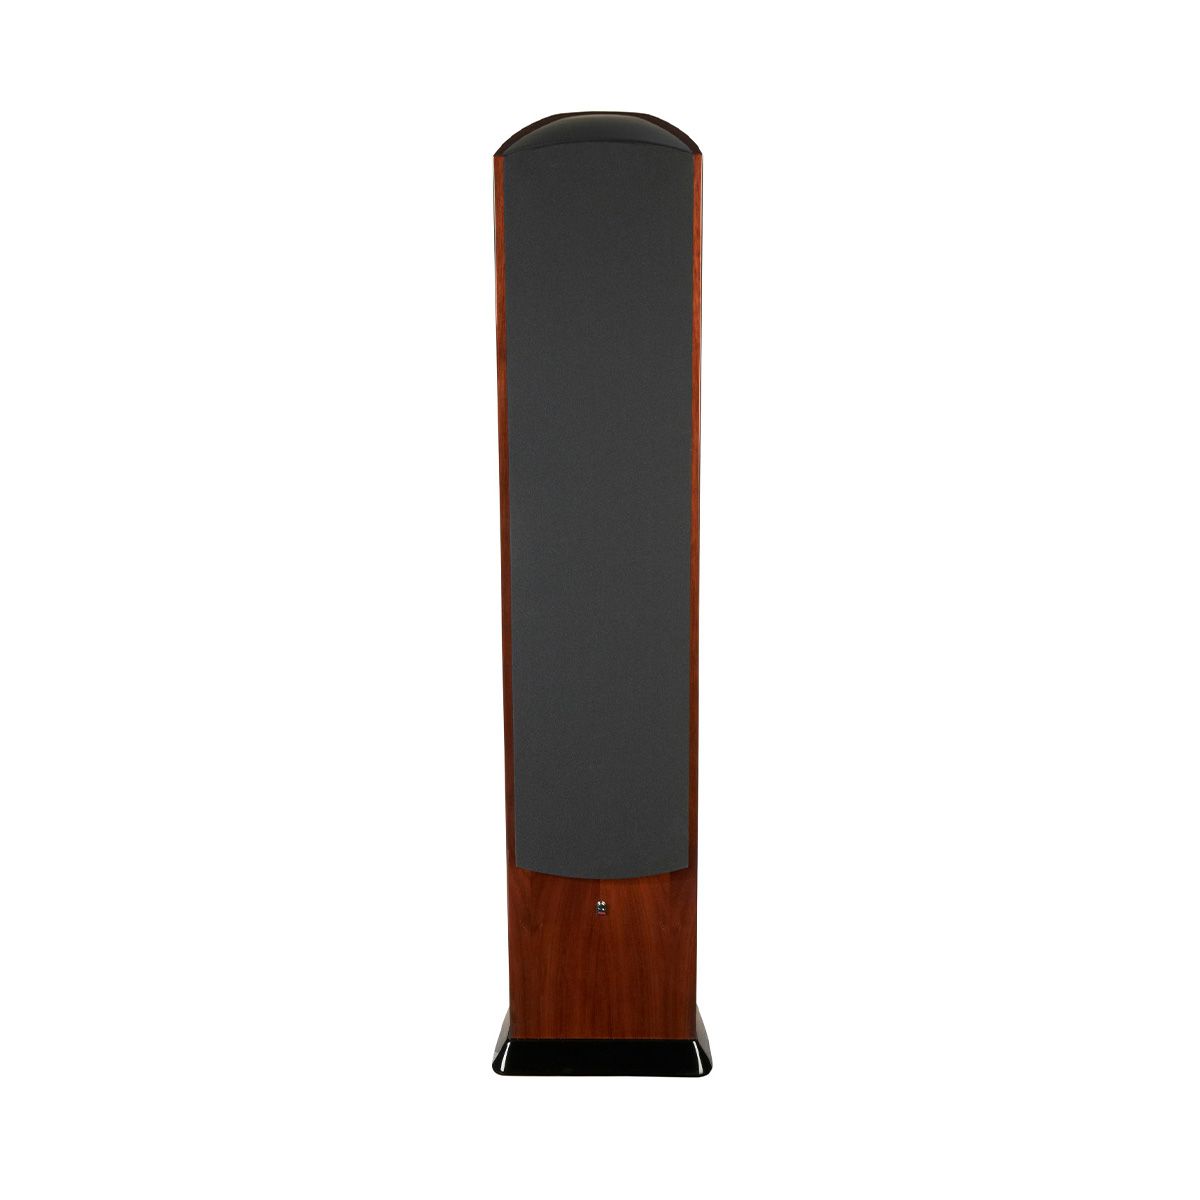 Revel F206 3-Way Floorstanding Tower Loudspeaker - Walnut single with grille - front view